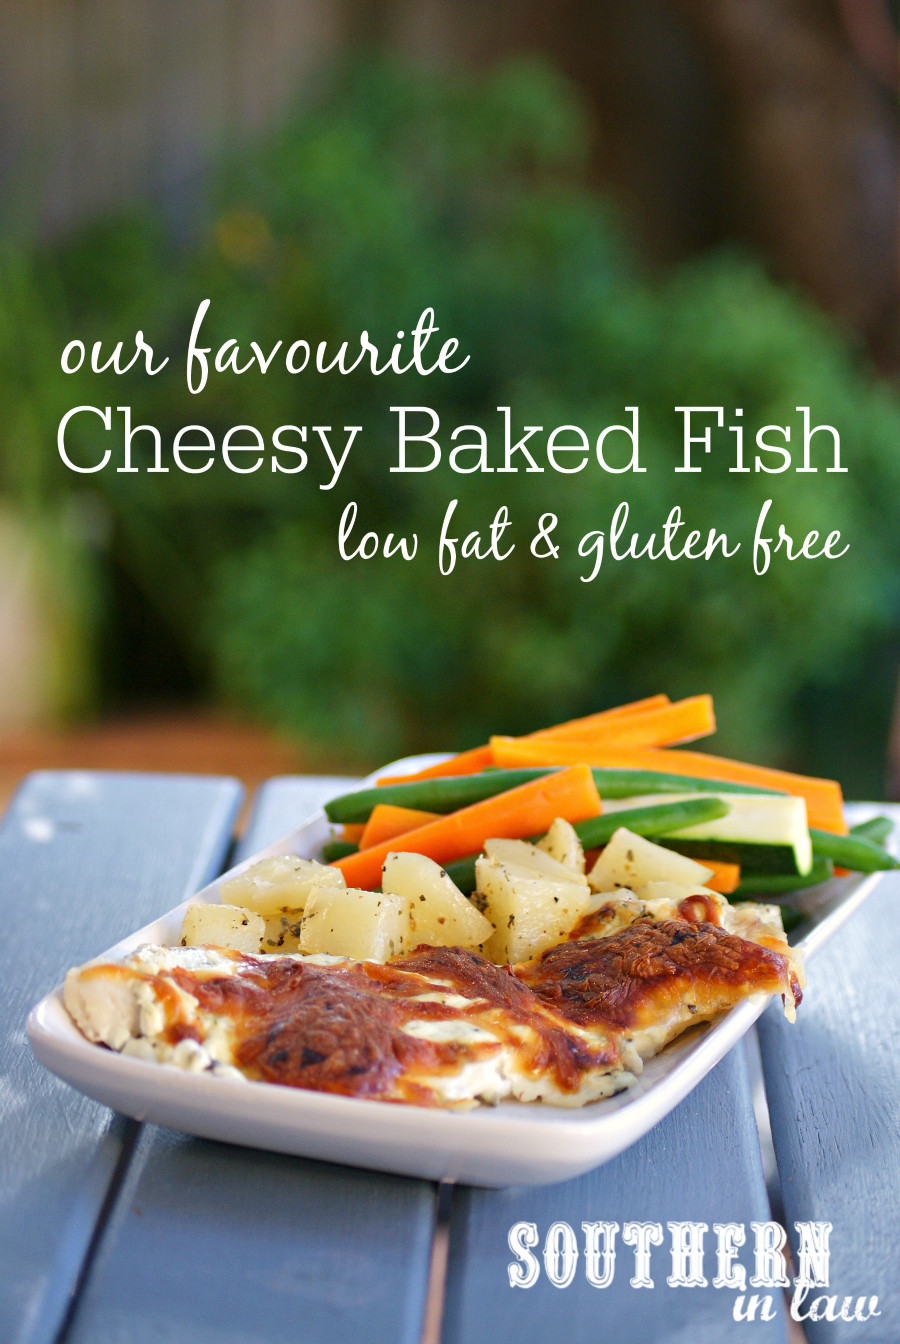 Baked Fish Recipes Healthy
 Southern In Law Recipe Our Favourite Cheesy Baked Fish